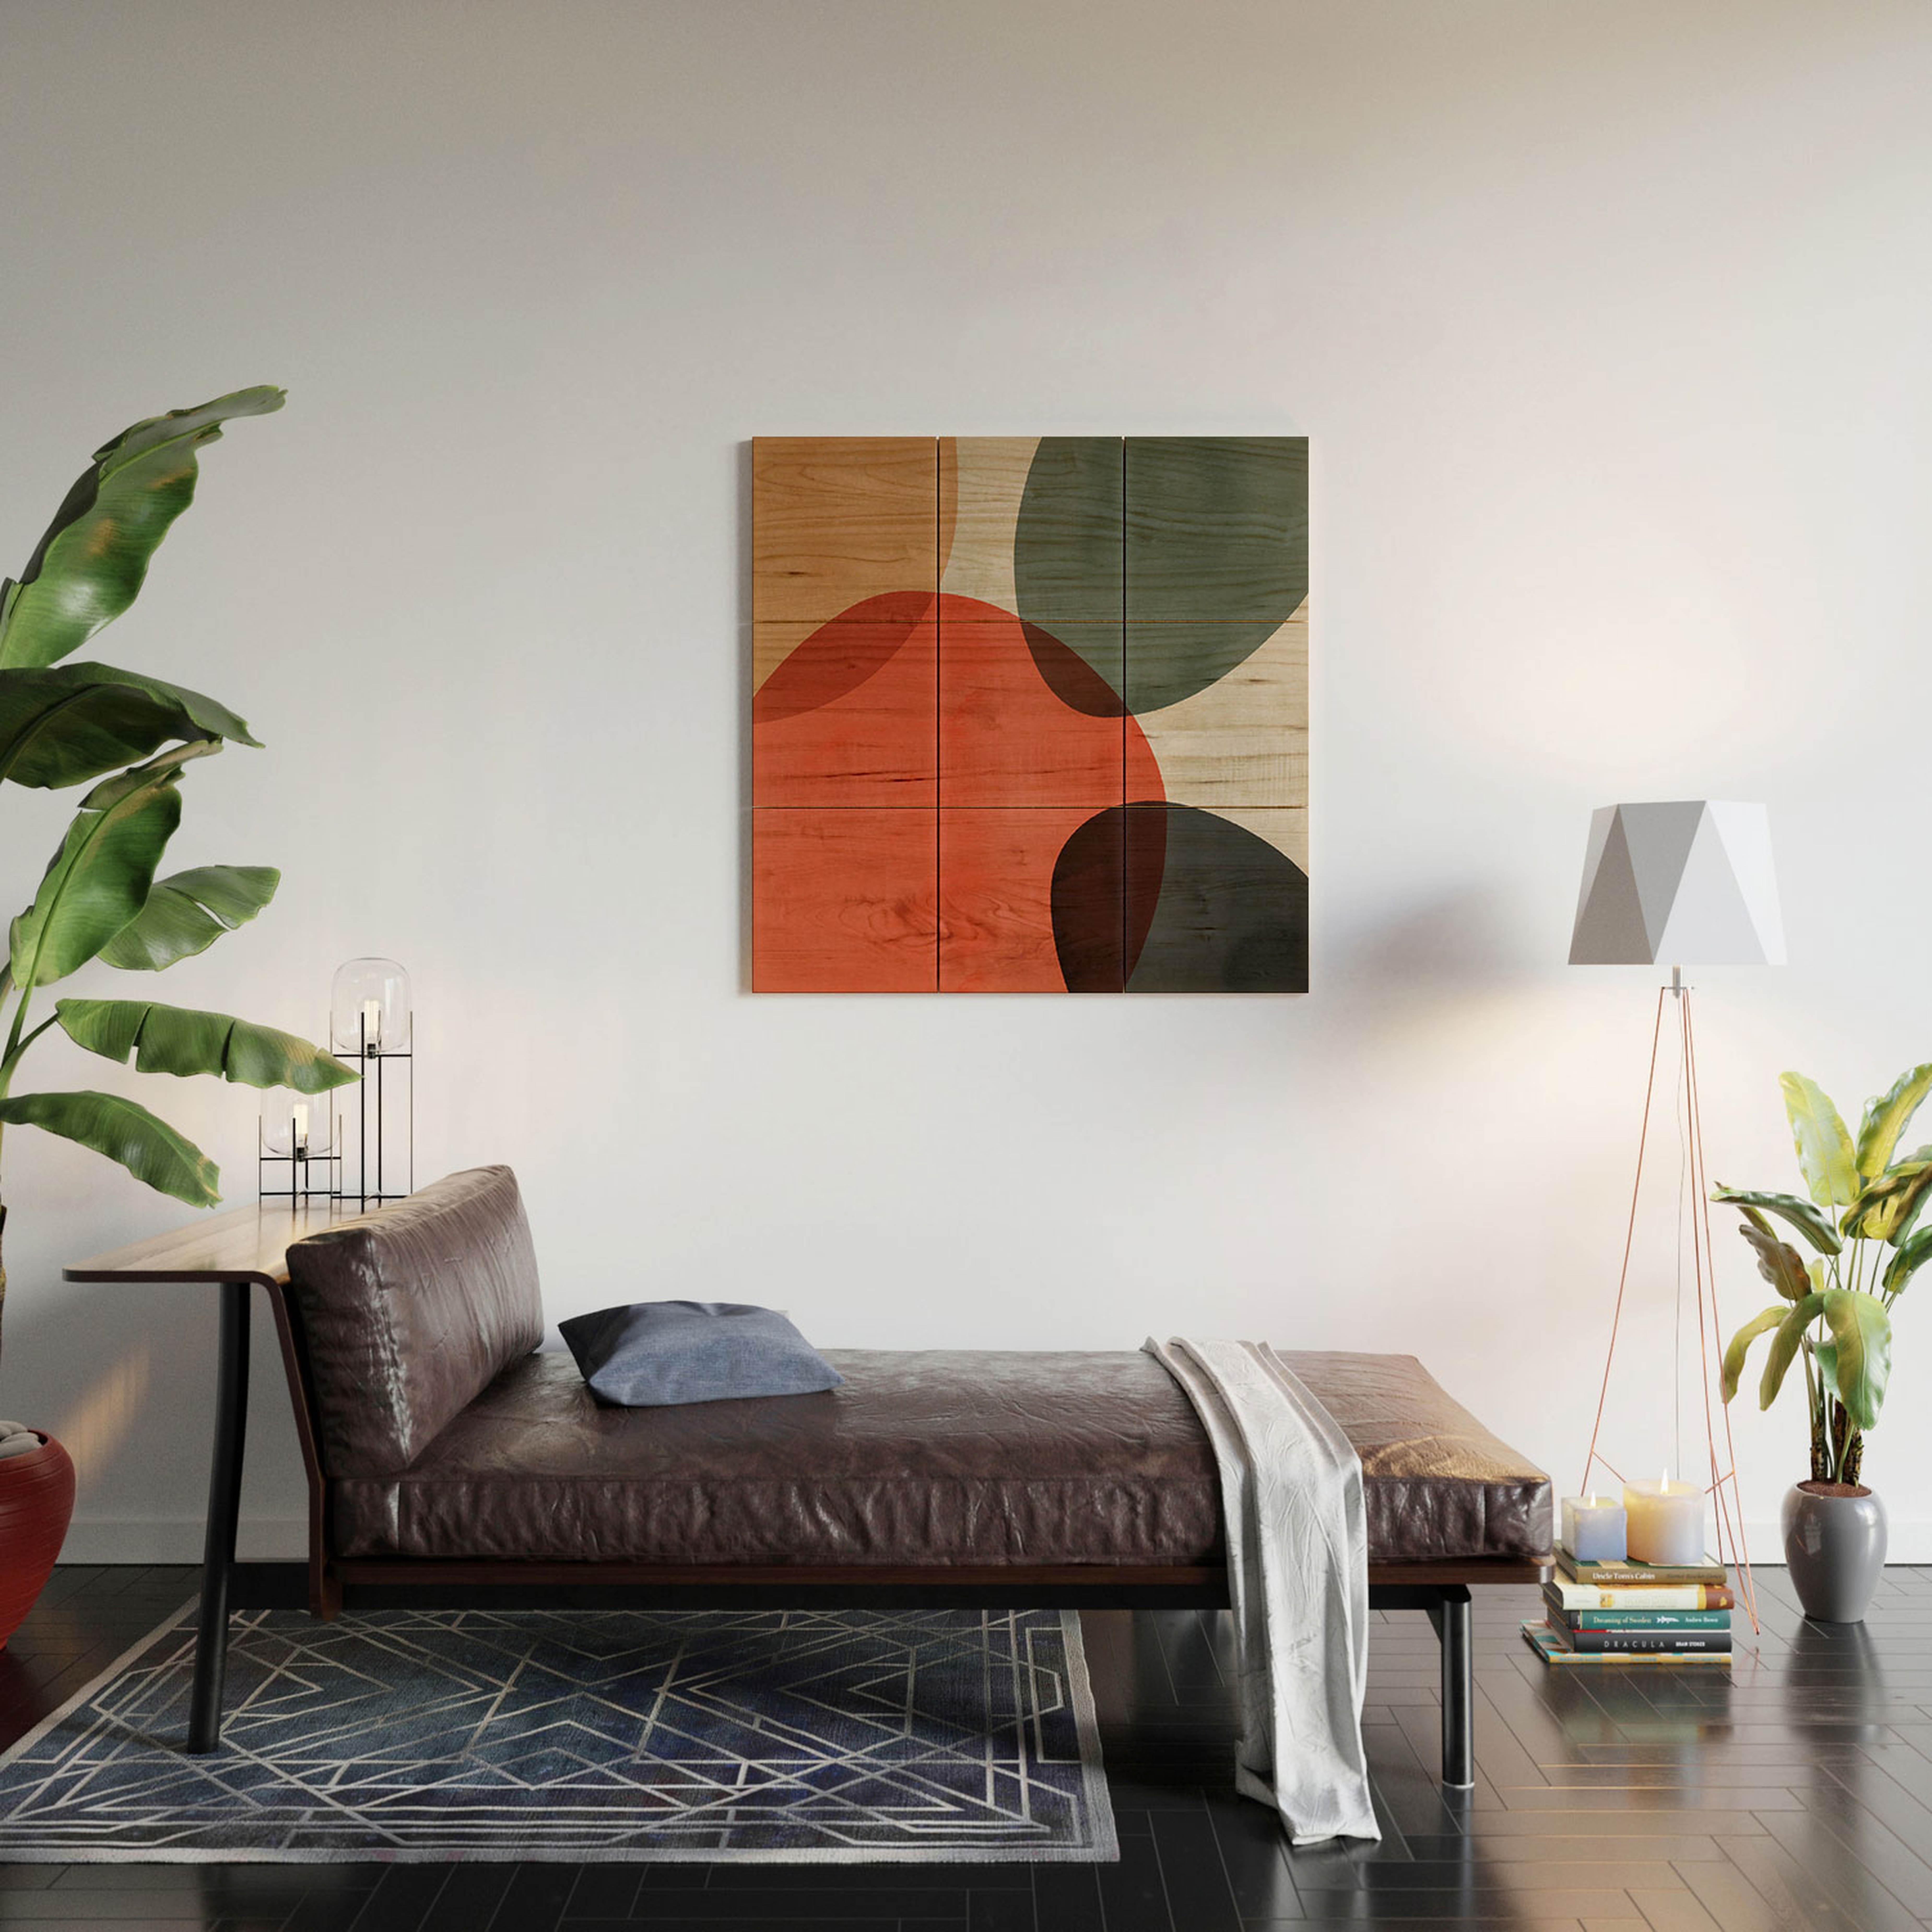 Winter Abstract Theme by Emanuela Carratoni - Wood Wall Mural5' x 5' (Nine 20" wood Squares) - Wander Print Co.